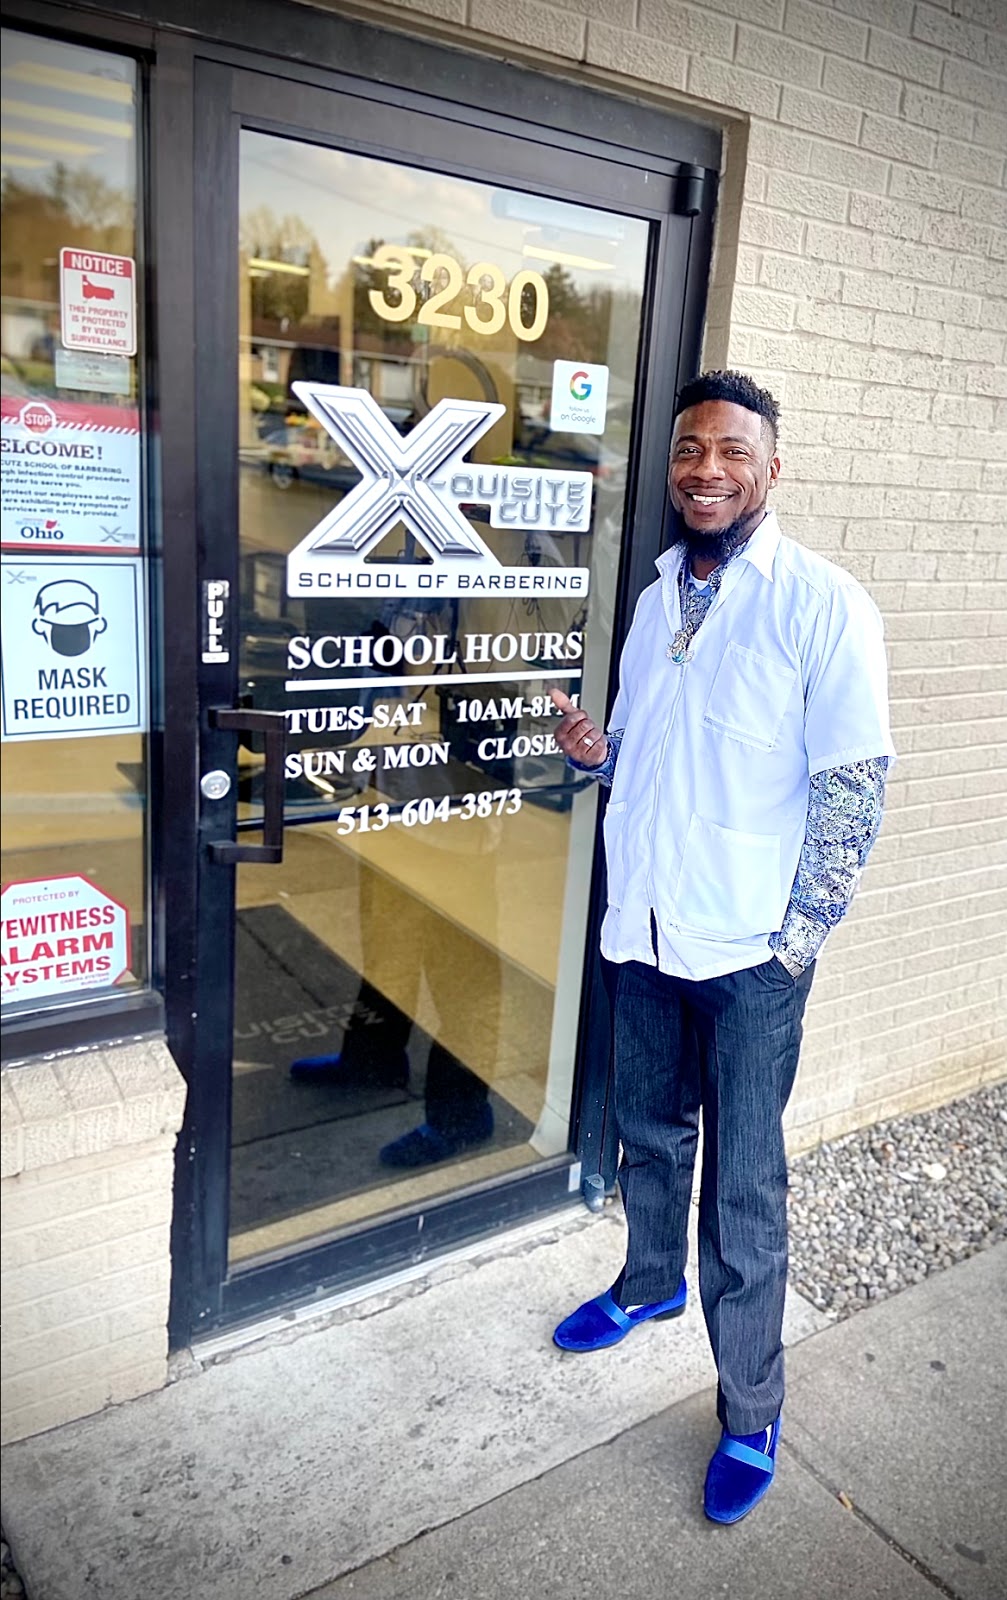 X-QUISITE CUTZ SCHOOL OF BARBERING | 3230 Roosevelt Blvd, Middletown, OH 45044, USA | Phone: (513) 604-3873